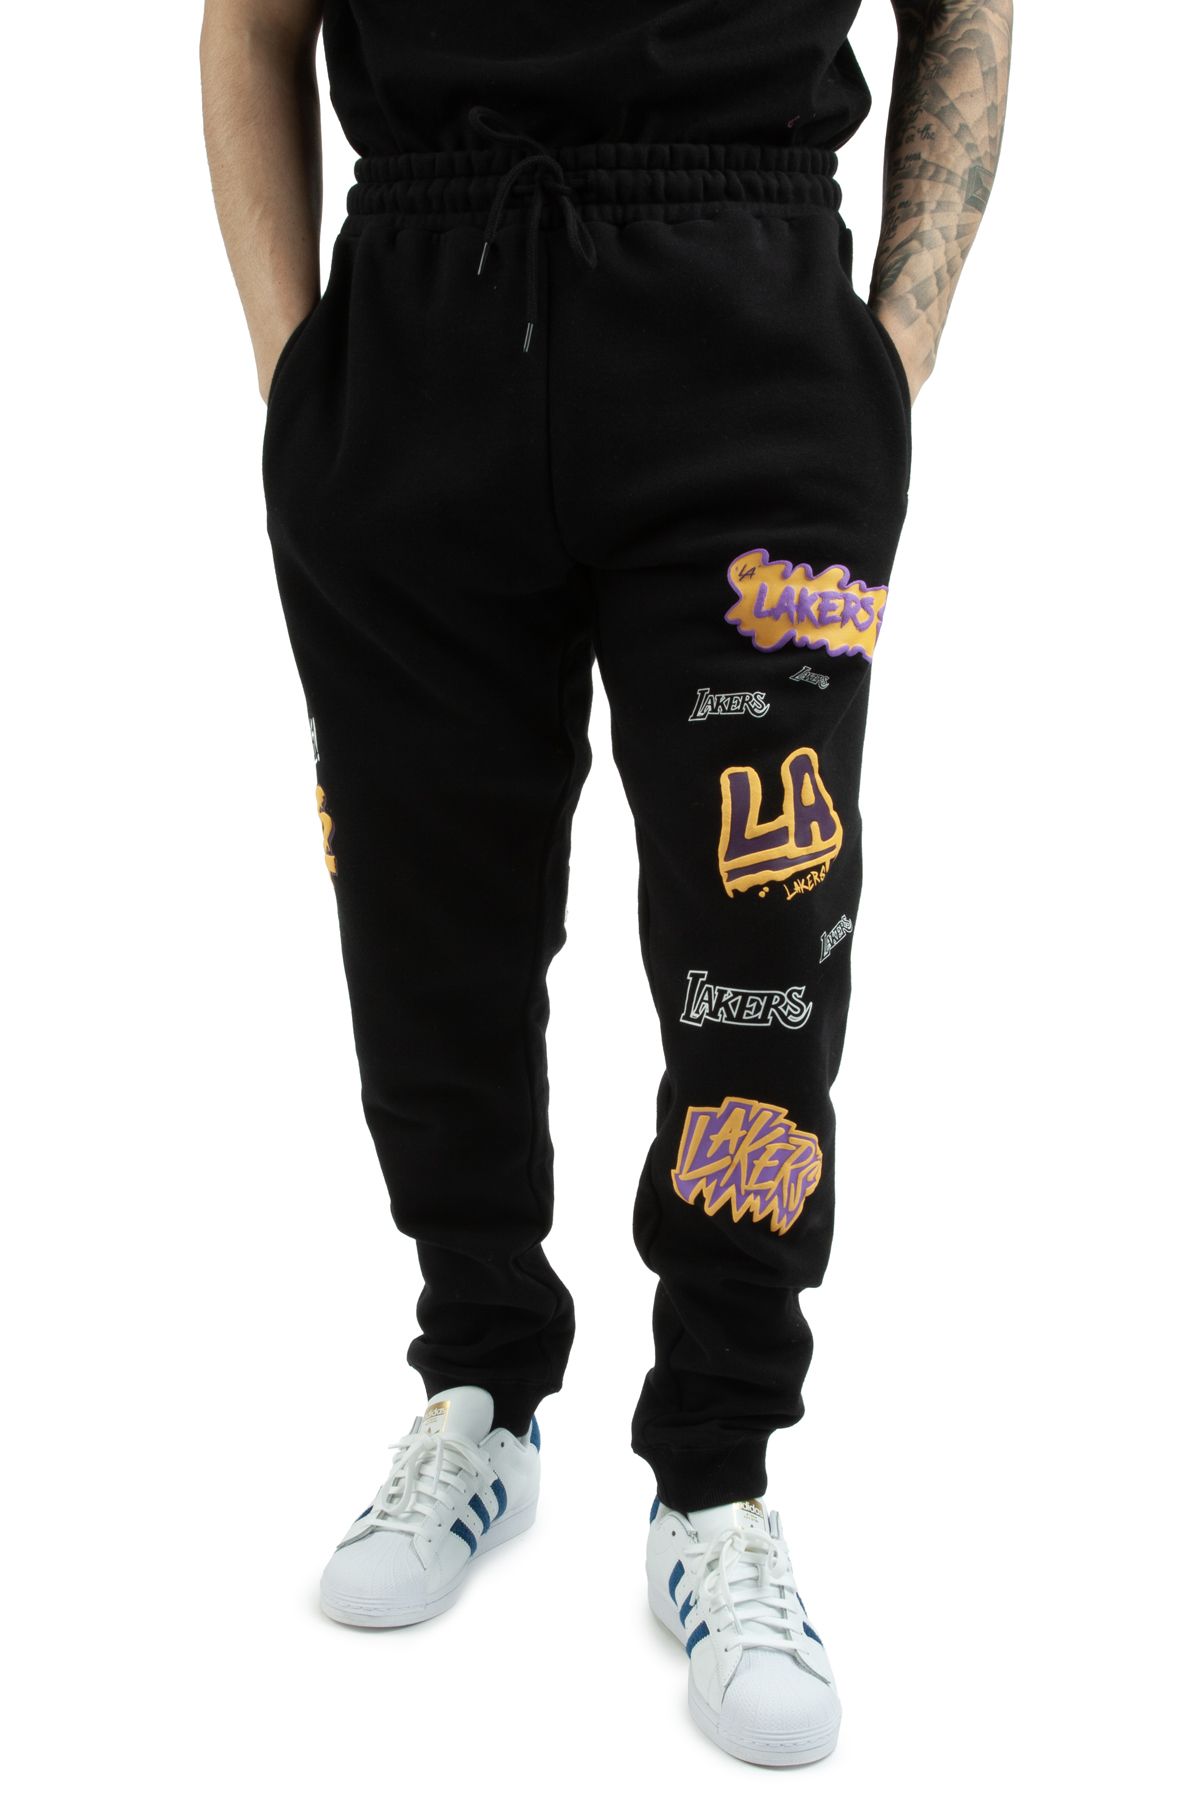 MITCHELL AND NESS Los Angeles Lakers Slap Sticker Sweatpant PSWP4773 ...